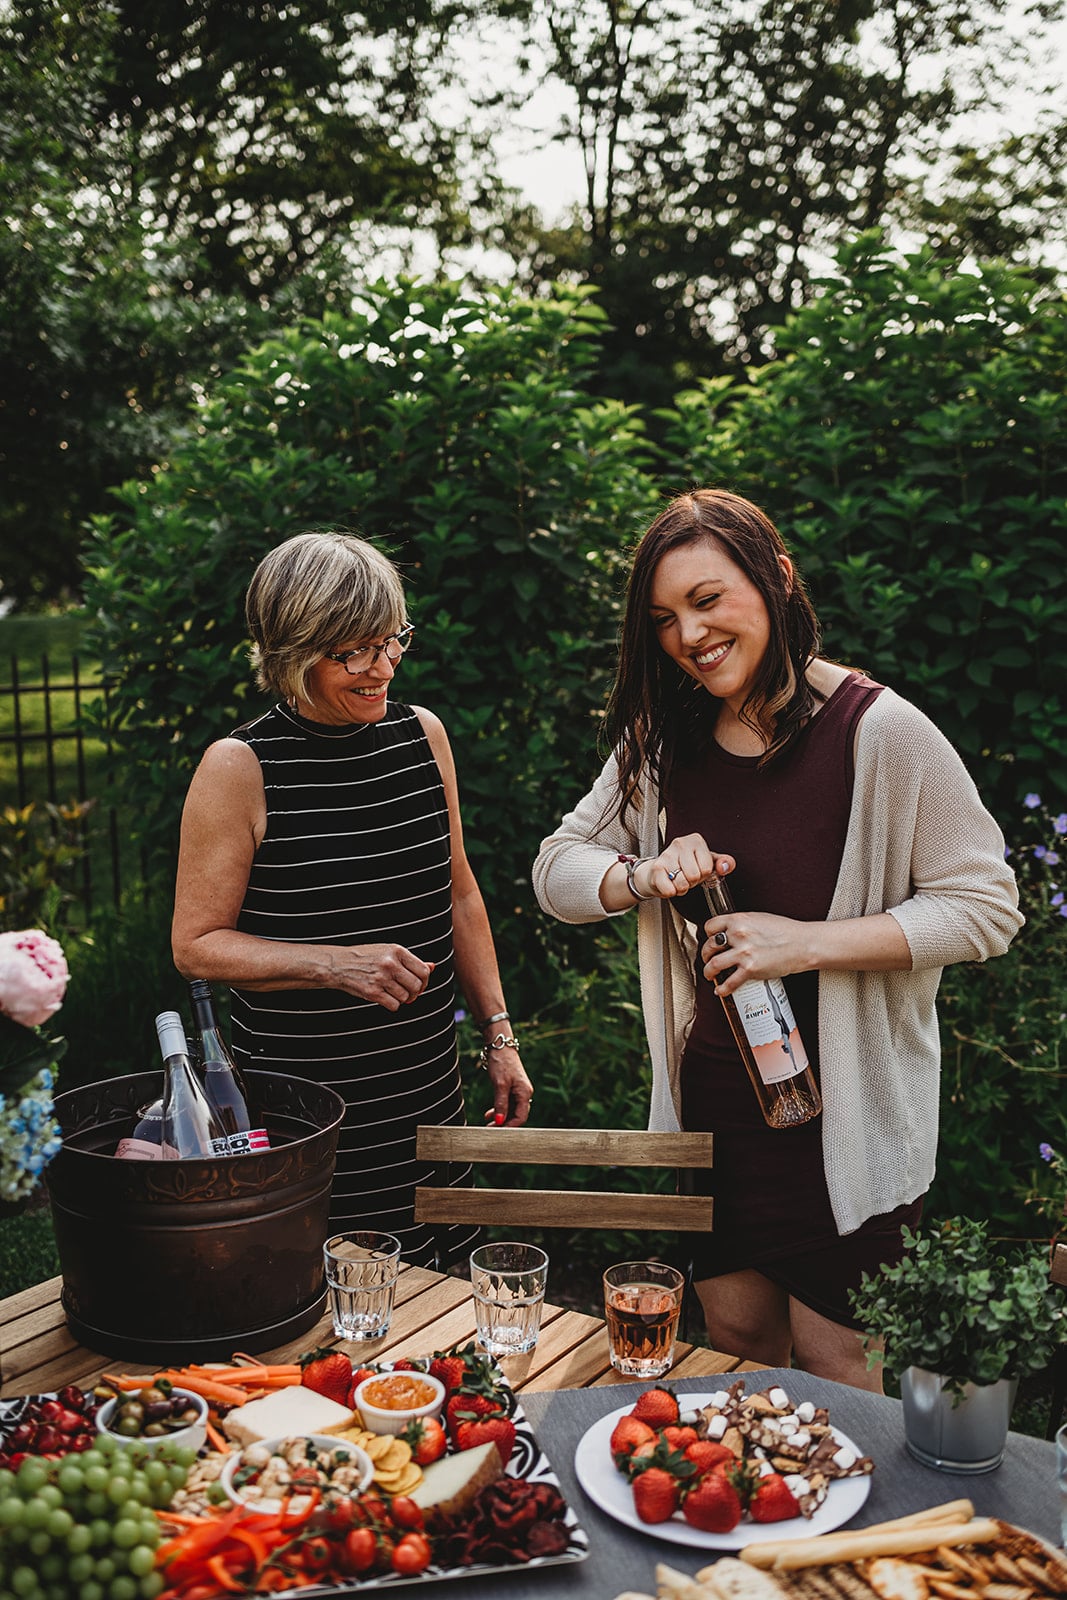 A photo of two women opening a bottle of wine at an outdoor gathering.